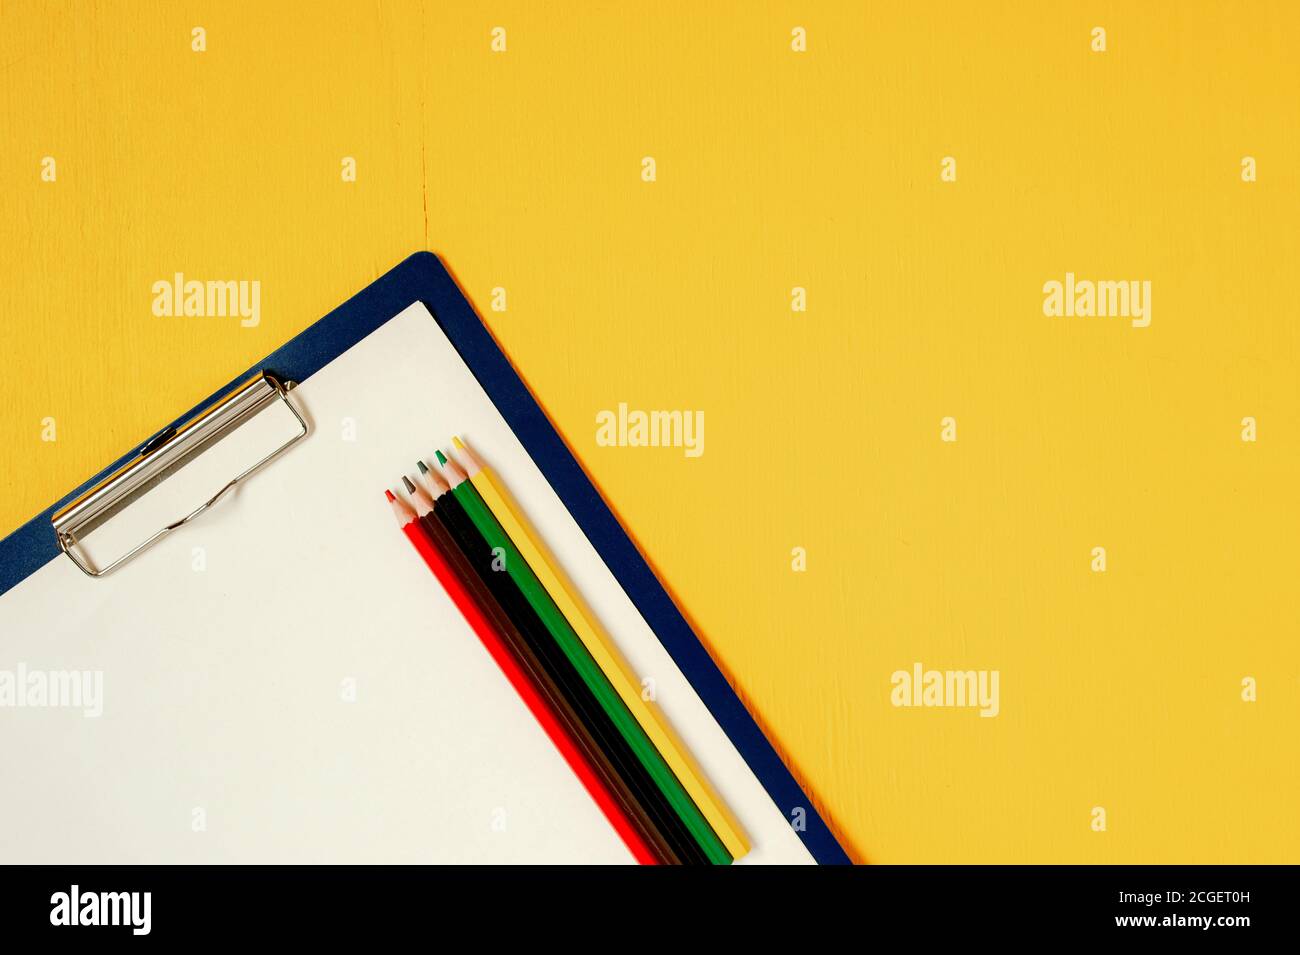 A paper tablet with a blank sheet and five colored wooden pencils on a bright yellow wooden background Stock Photo